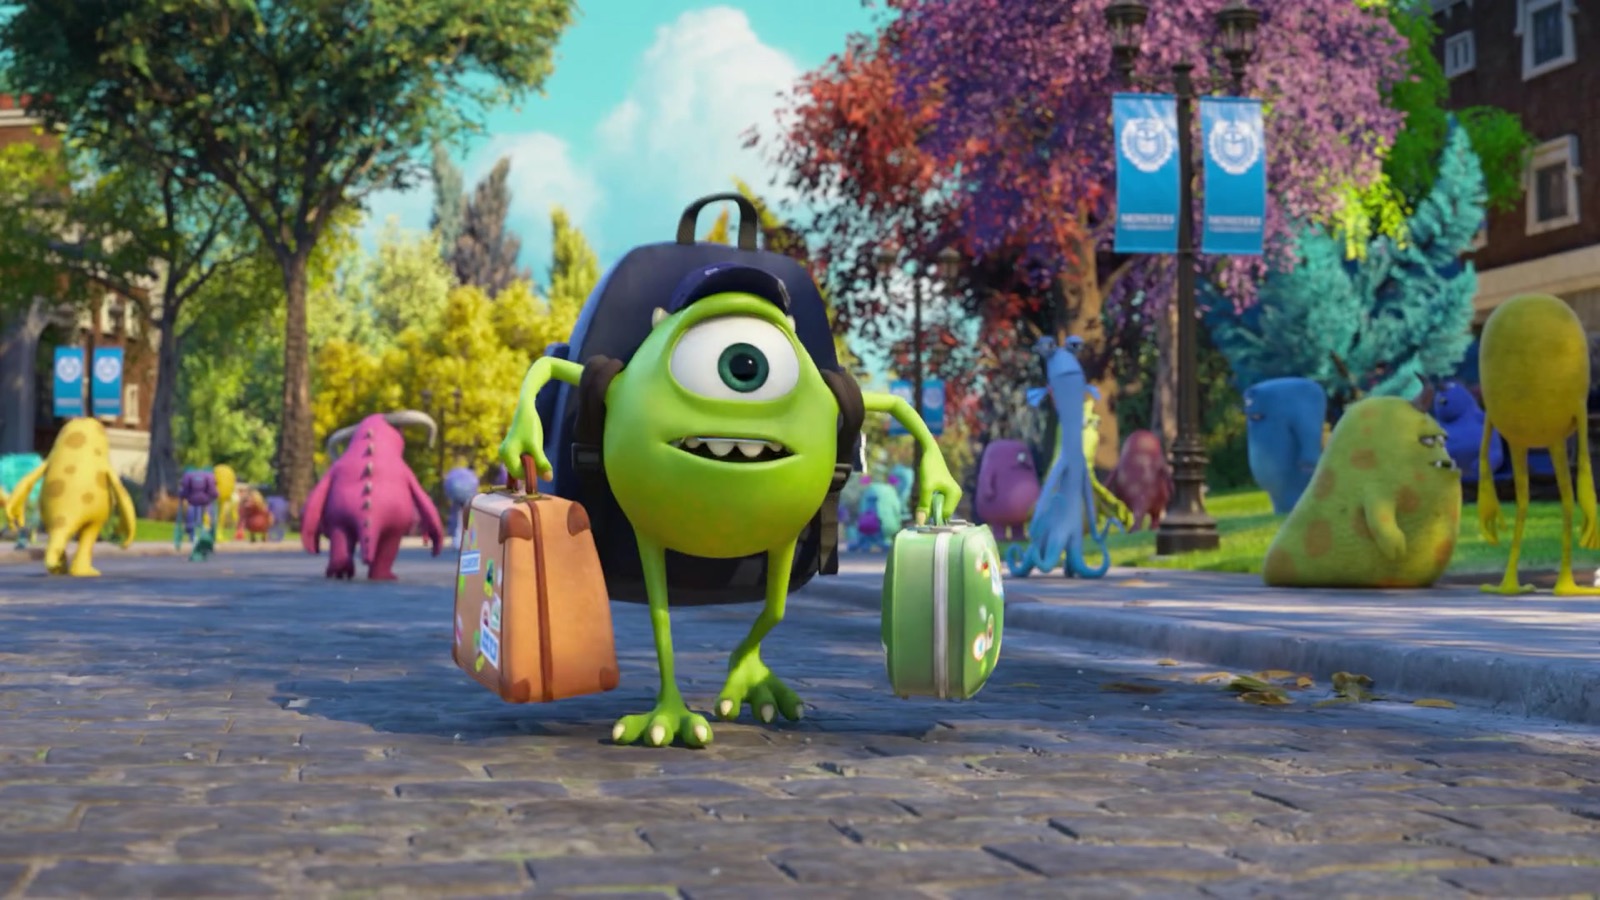 Decide If These Pixar Movies Are Overrated or Underrated and We’ll Guess Your Generation Monsters University (2013)